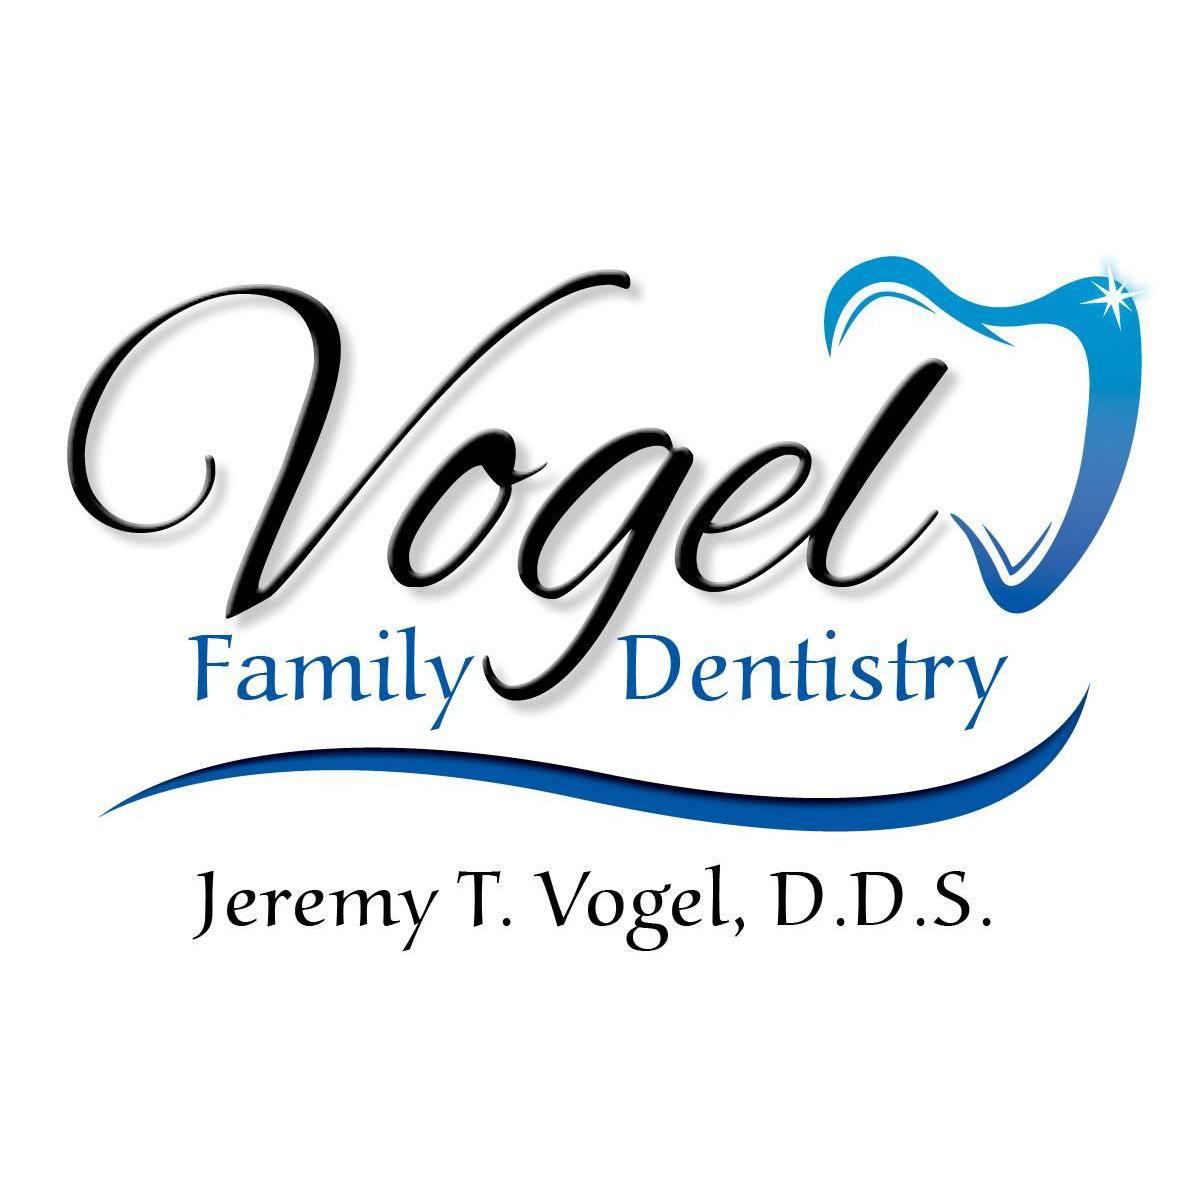 Vogel Family Dentistry - Osseo, WI 54758 - (715)597-5559 | ShowMeLocal.com